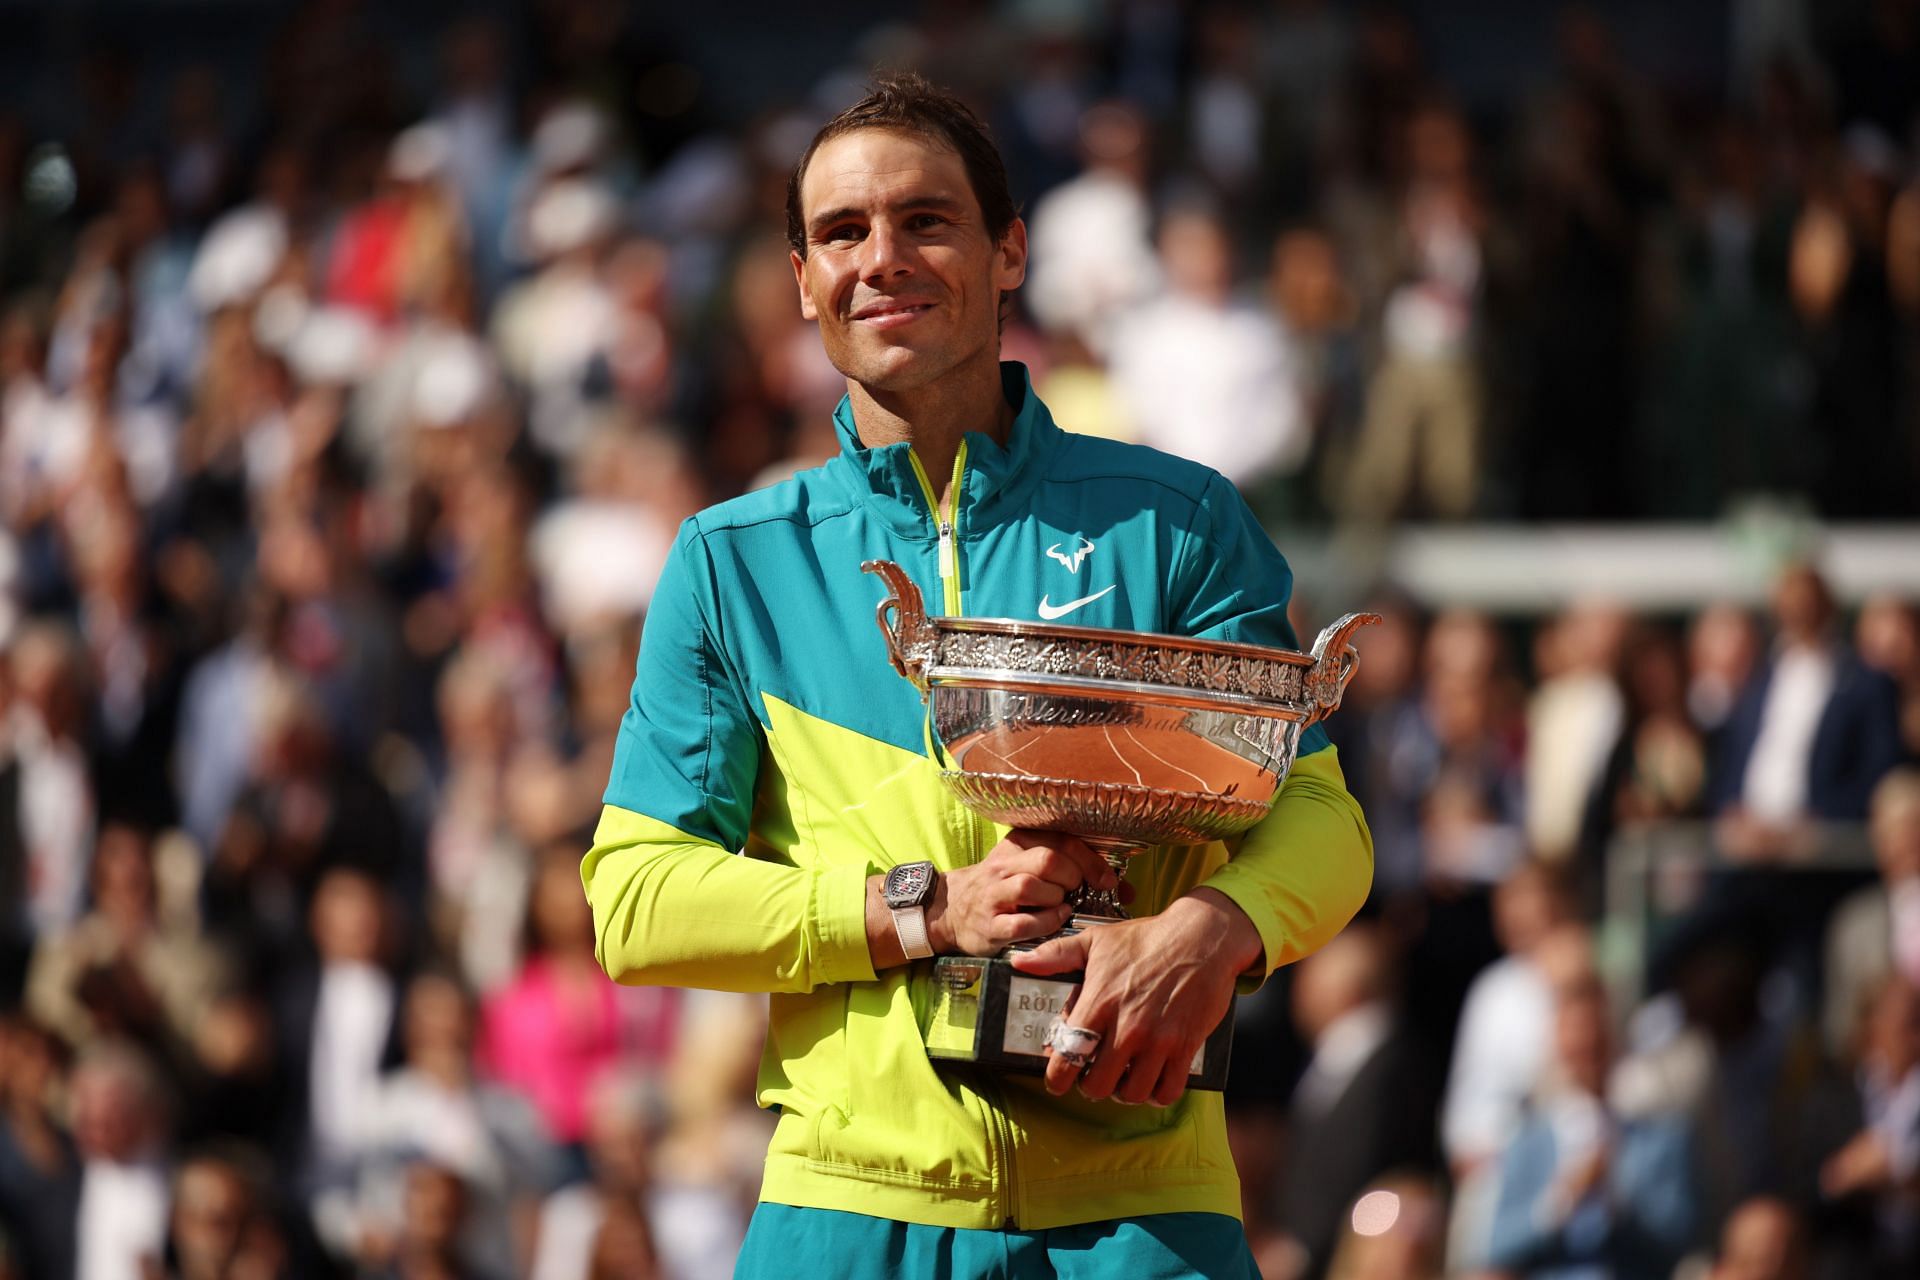 Rafael Nadal won the French Open by beating Casper Ruud in the final